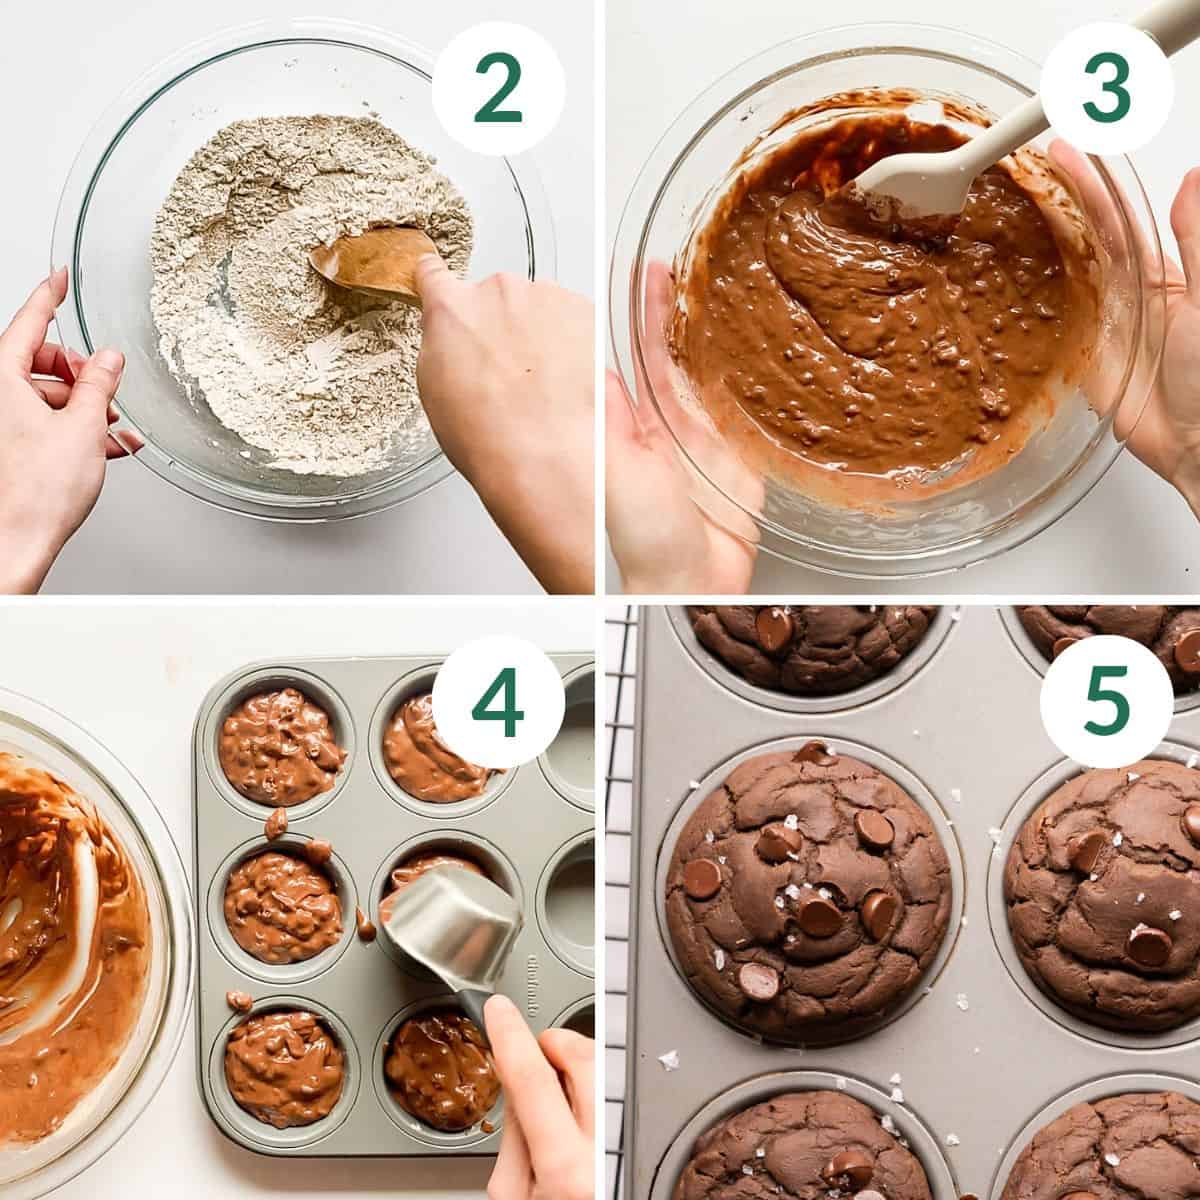 Four photos showing mixing dry ingredients, the finished muffin batter, spooning the batter into a muffin tin, and the final muffins baked in a muffin tin.